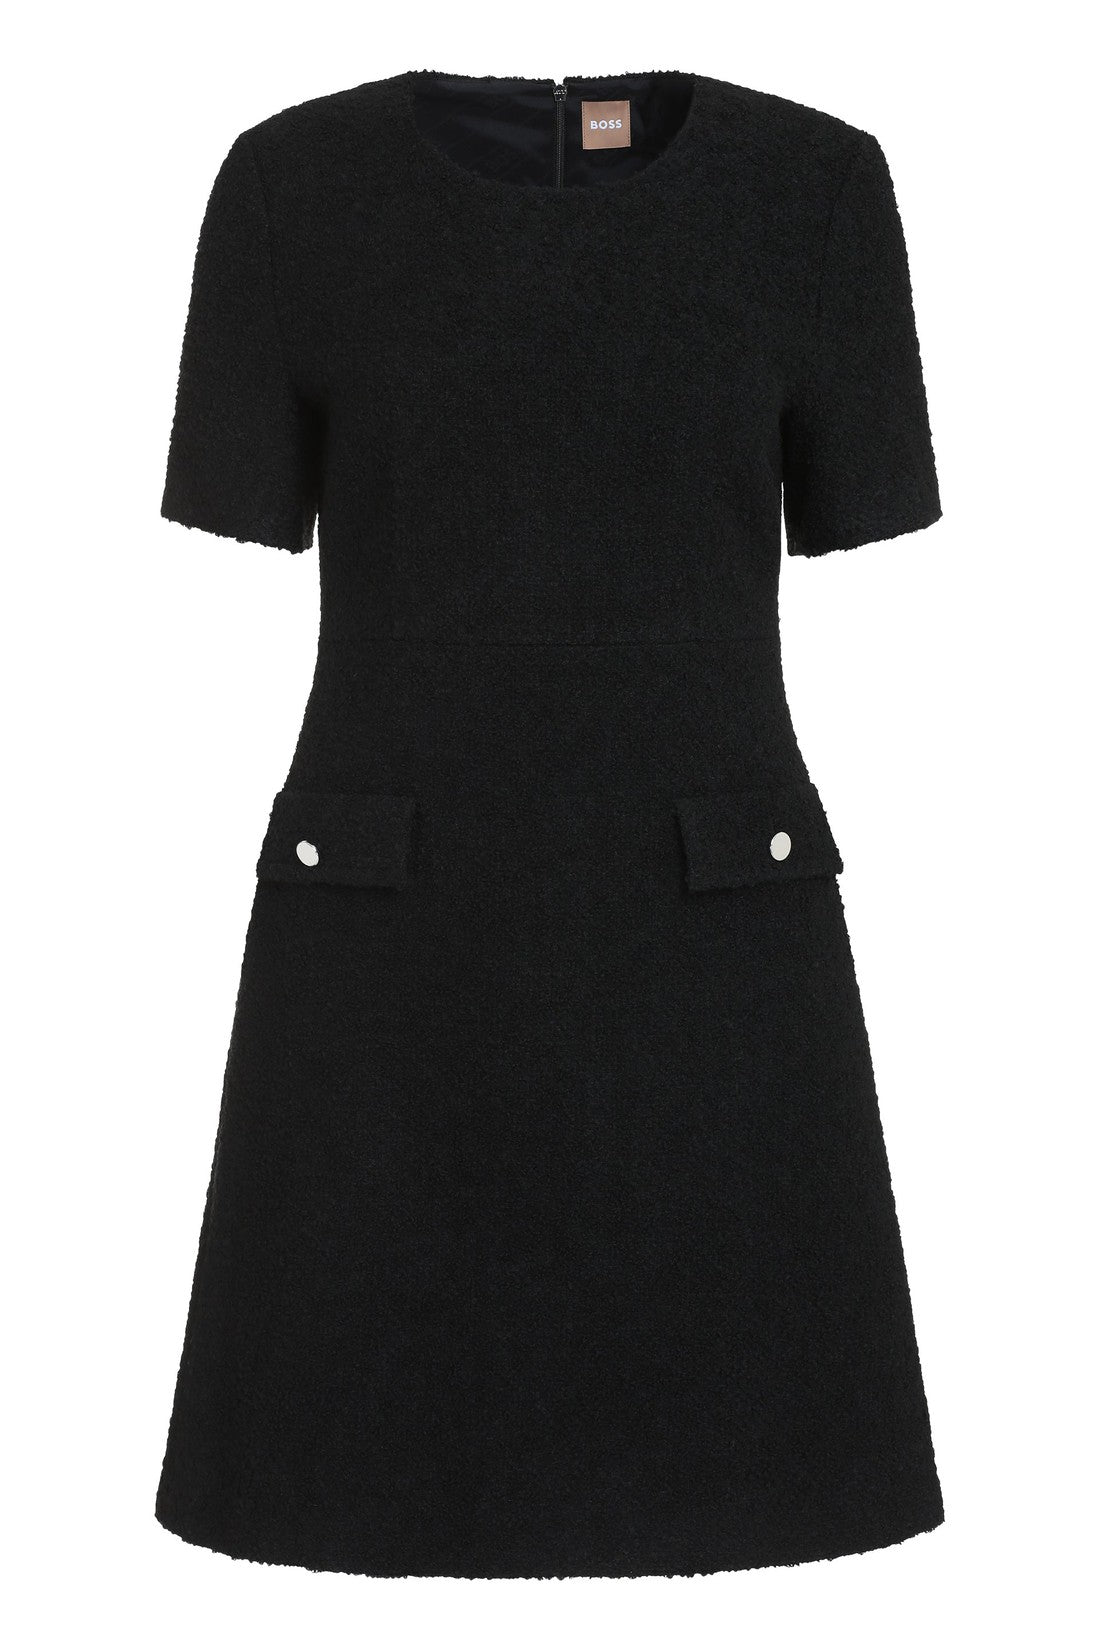 BOSS-OUTLET-SALE-Docanah knitted dress-ARCHIVIST